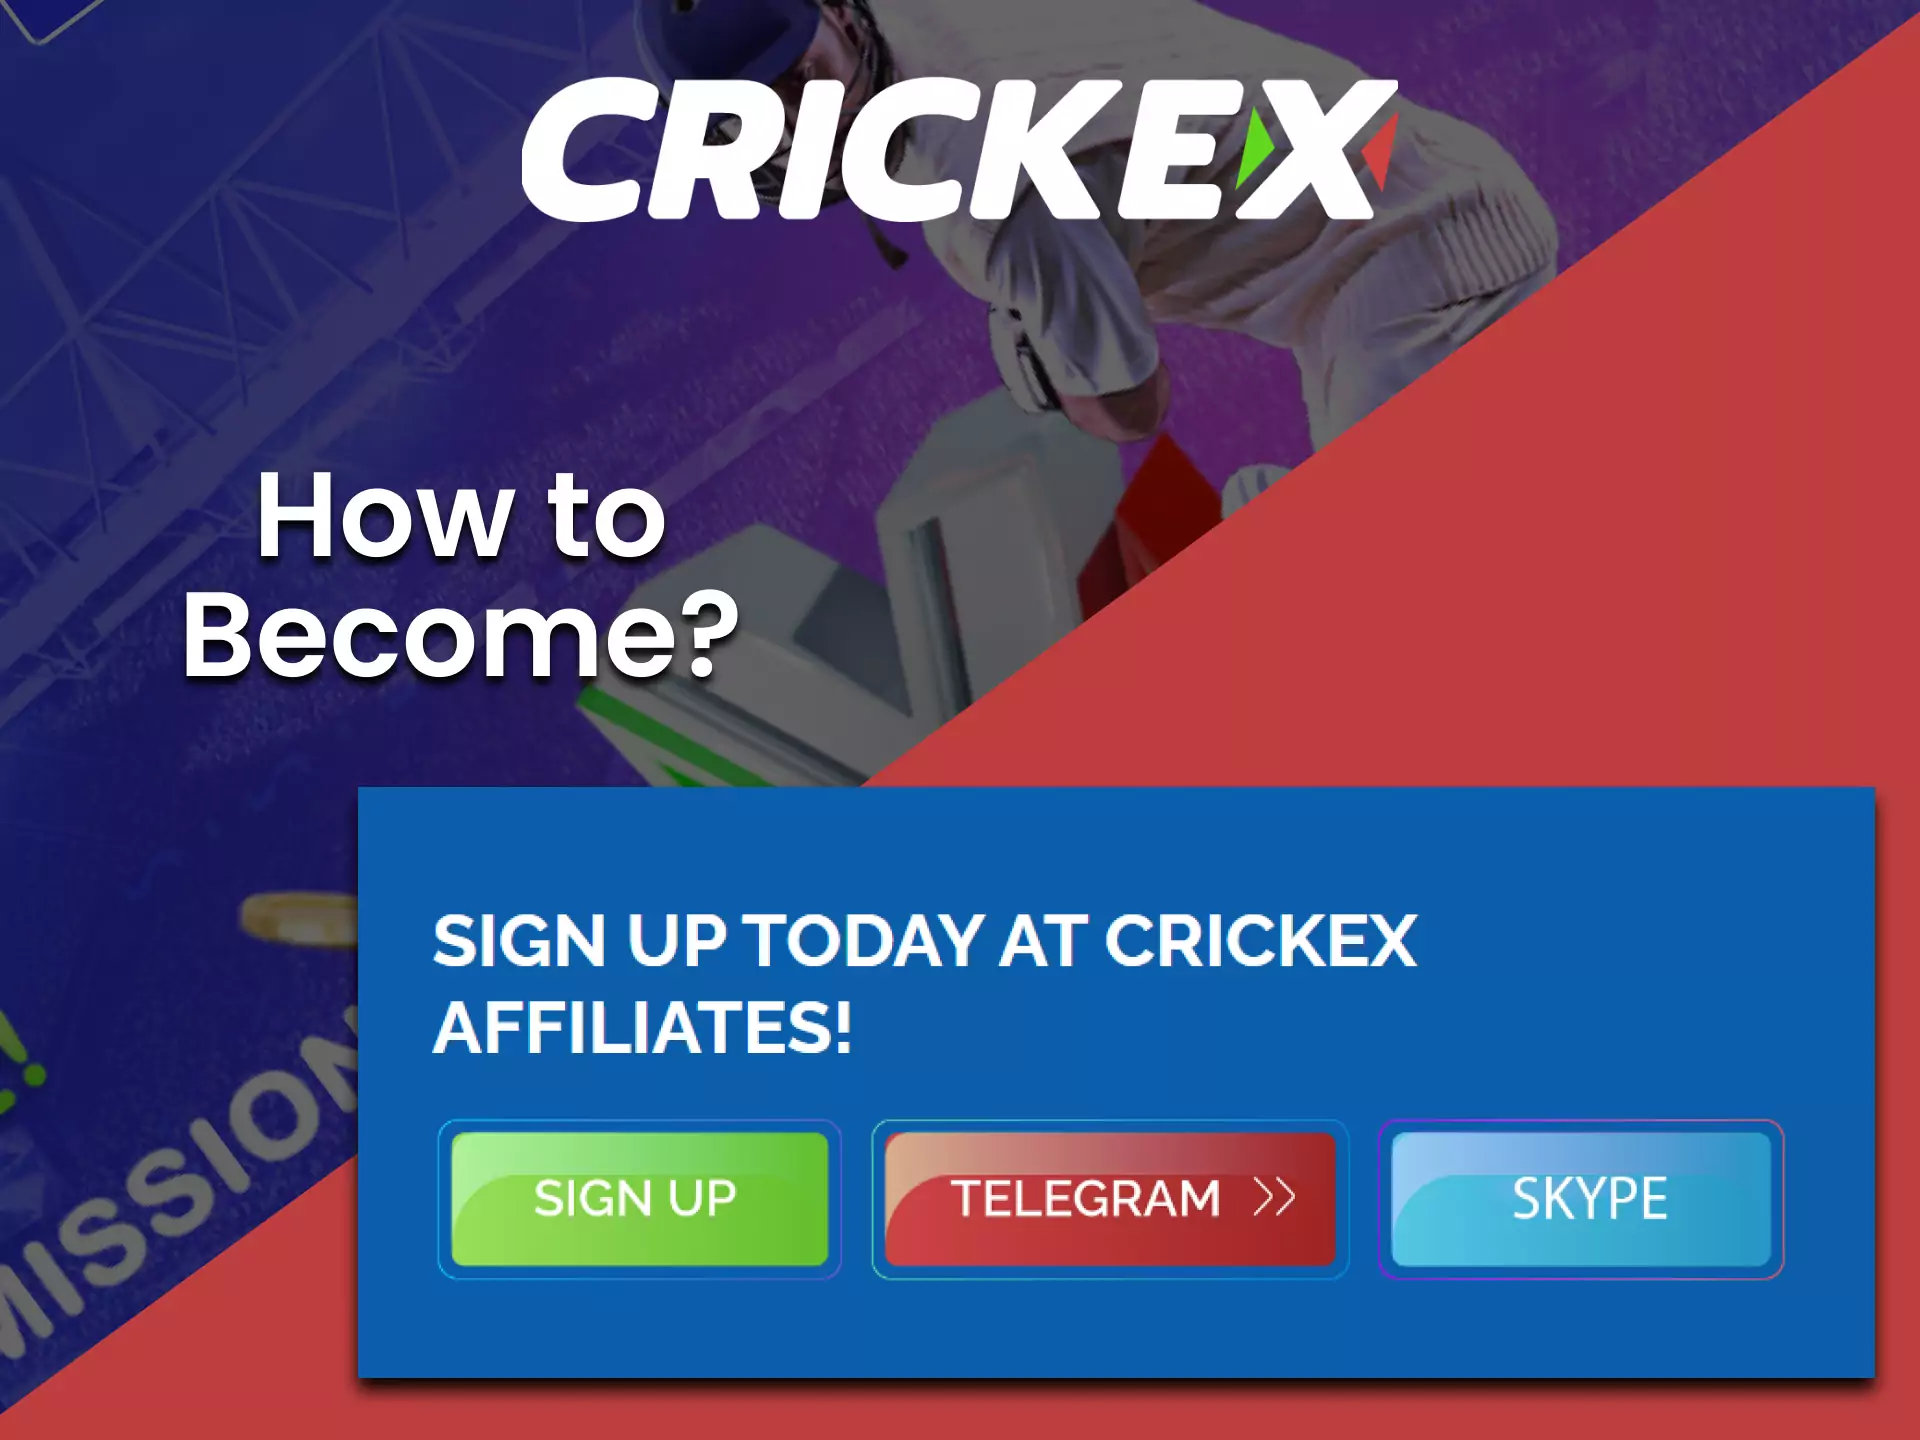 Let the Crickex team know that you want to join the affiliate program.